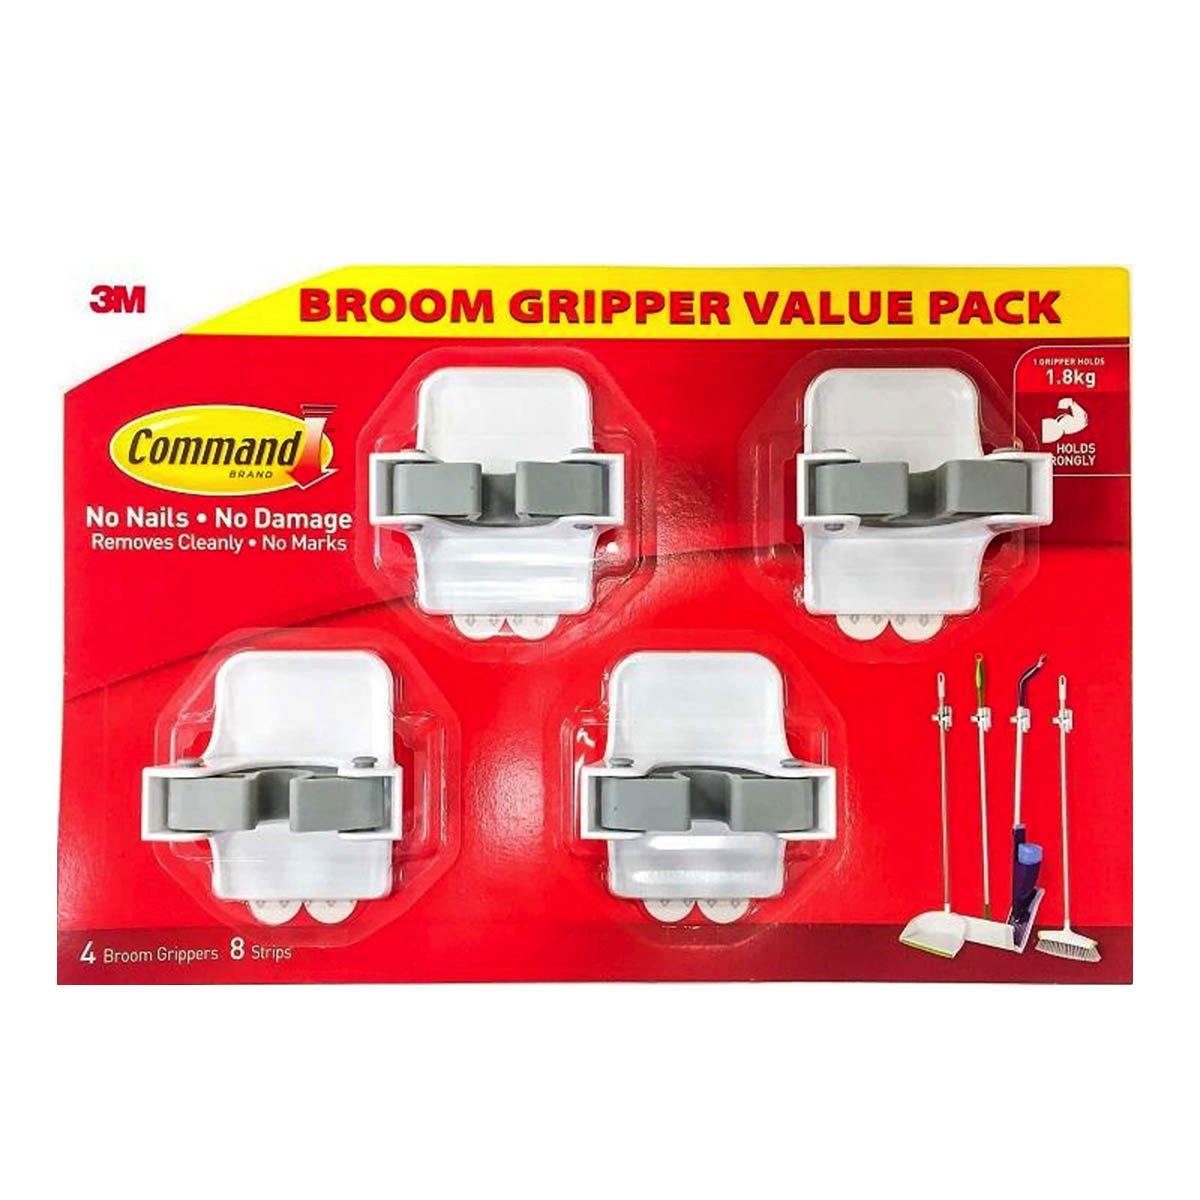 3M Command Broom Gripper Value Pack